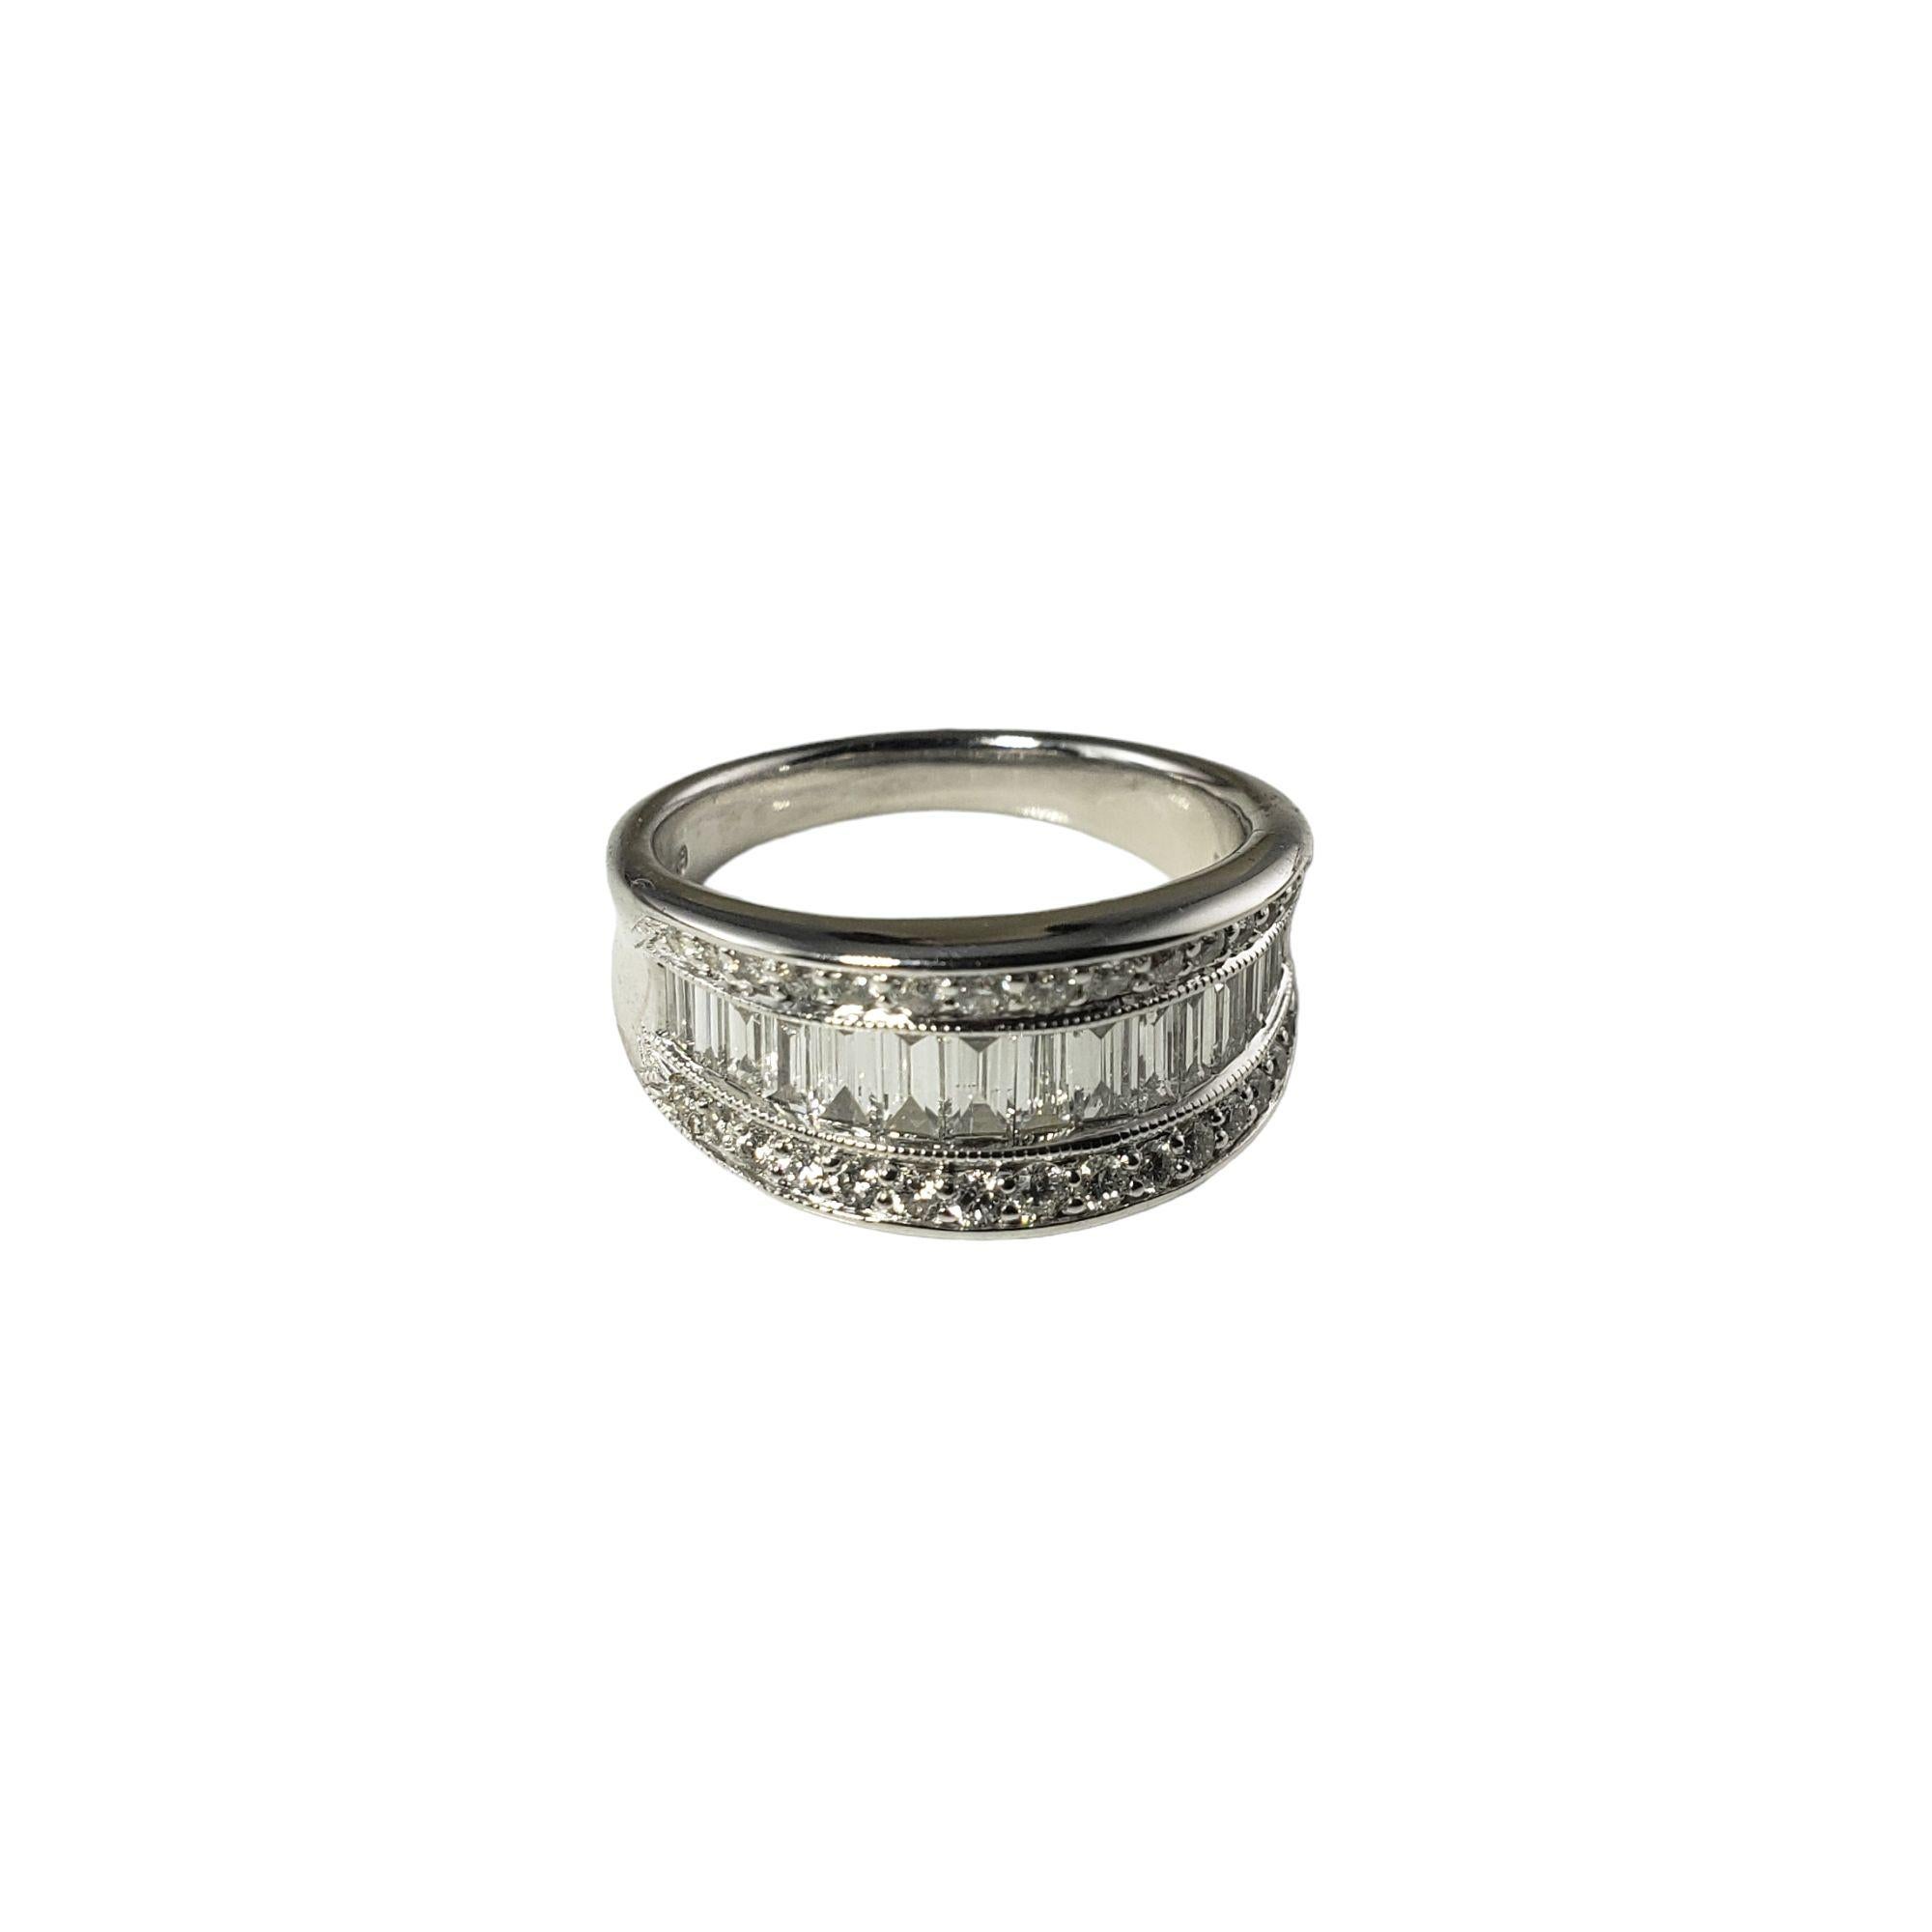 This sparkling band features 15 baguette diamonds and 30 round brilliant cut diamonds set in classic 14K white gold.  Width: 9 mm.

Shank: 3 mm.

Approximate diamond weight: . 74ct.

Diamond color: H-I

Diamond clarity: SI1-VS2

Ring Size: